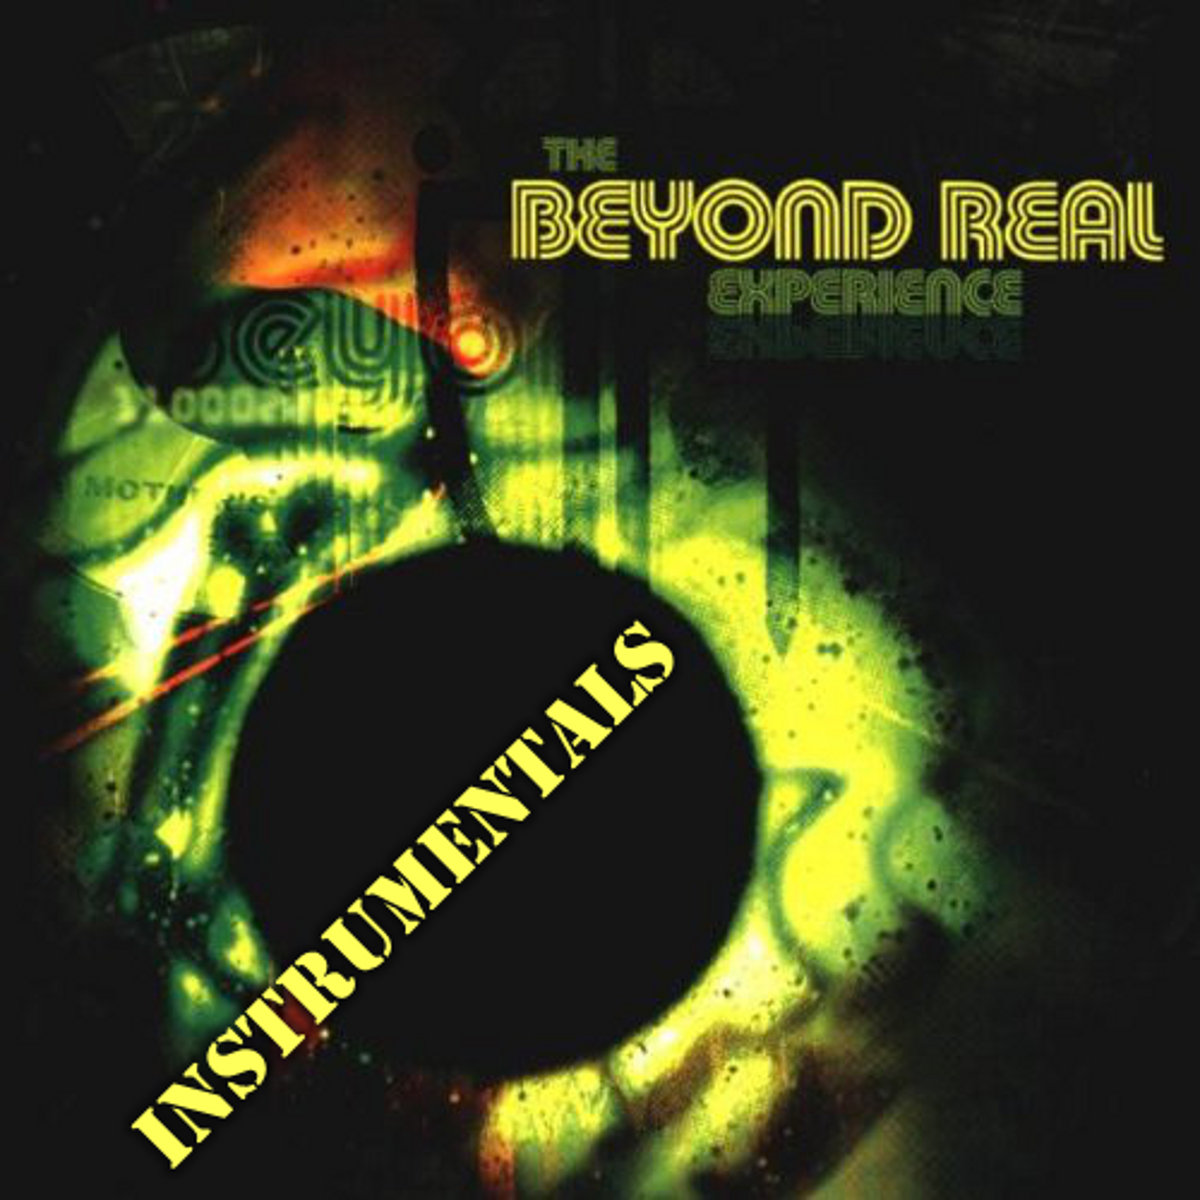 The_beyond_real_experience_volume_one_instrumentals_dj_spinna